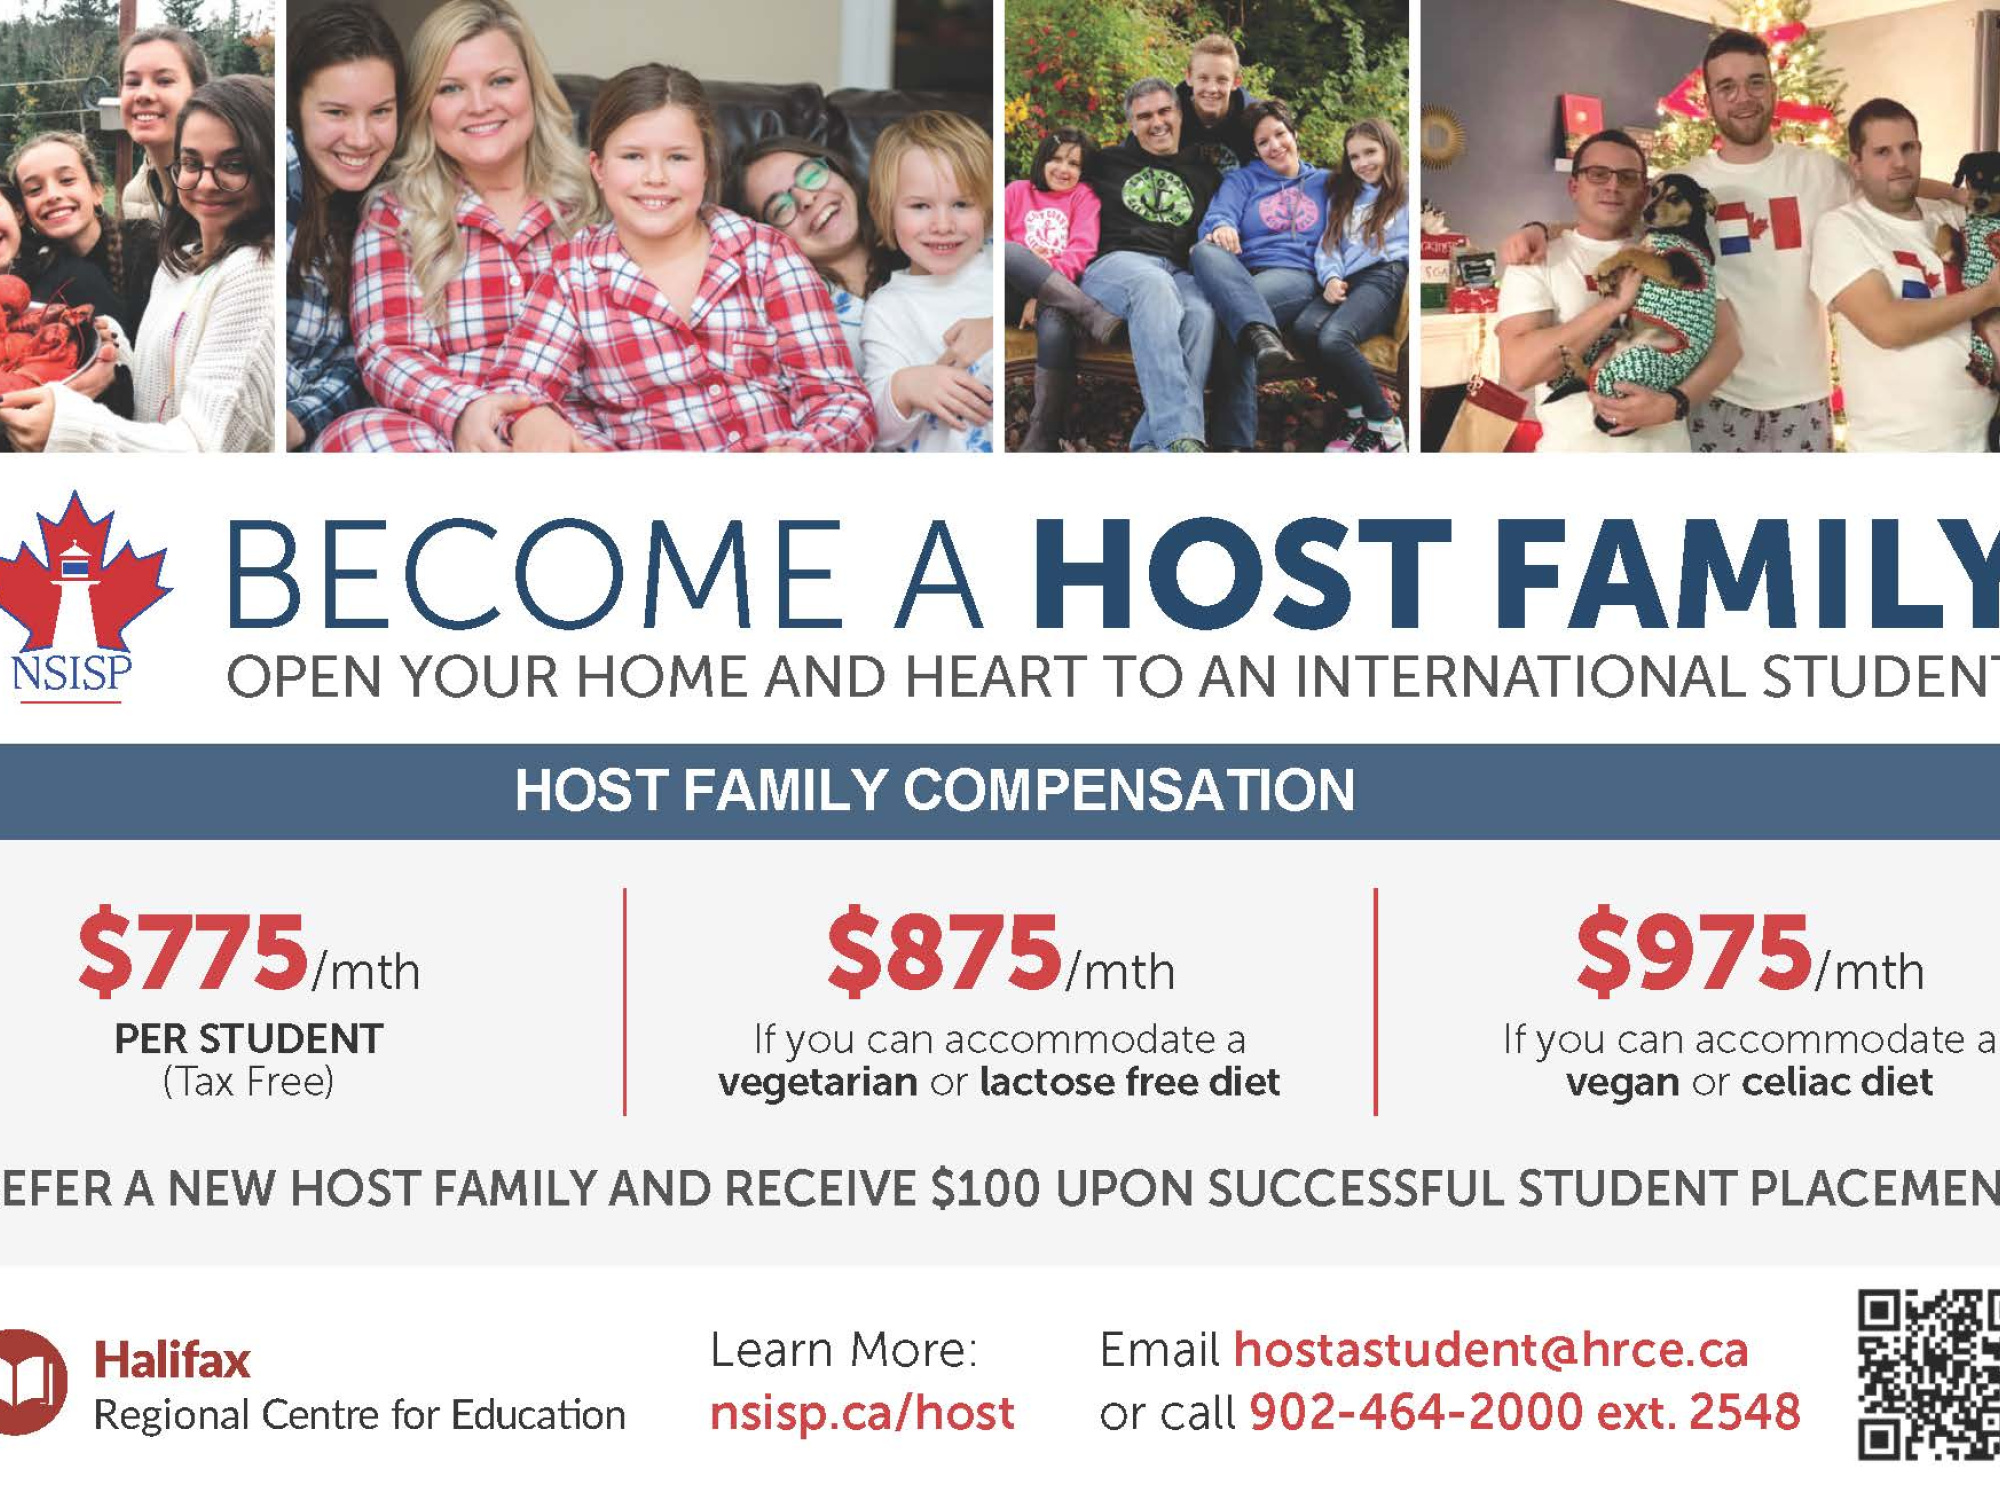 Postcard showing host family compensation options: $775 per month per student; $875 per month if you can accommodate a vegetarian or lactose-free diet; $975 per month if you can accommodate a vegan or celiac diet. Refer a new host family and receive $100 upon successful student placement.